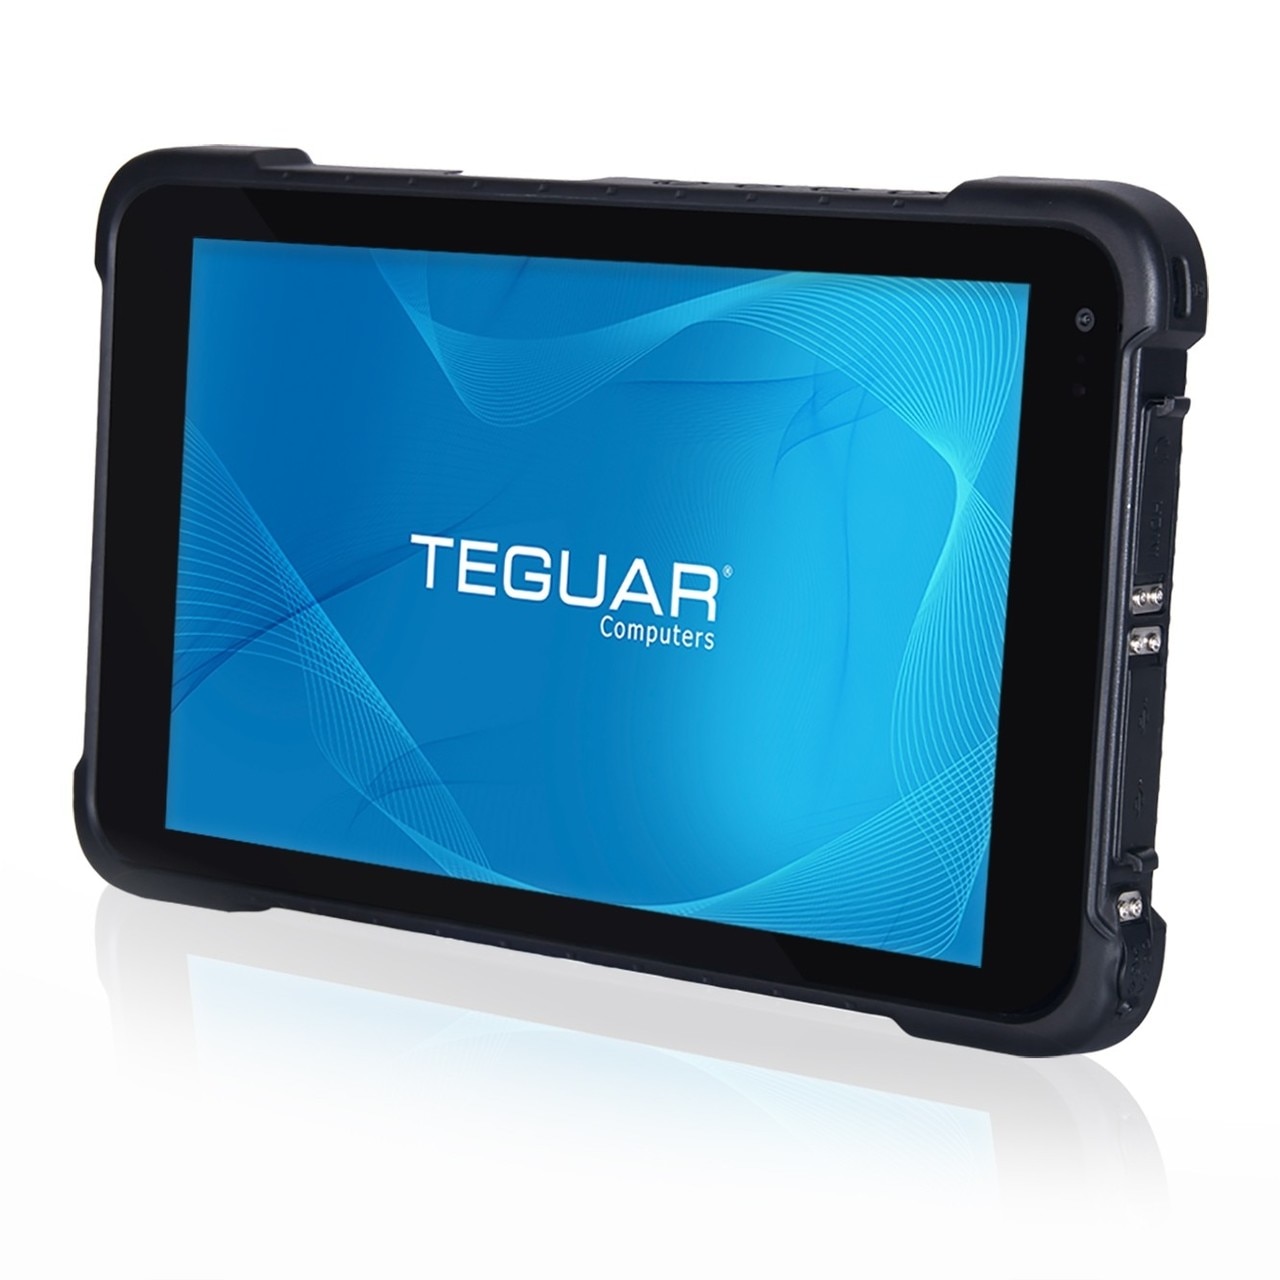 8-Inch Industrial Rugged Tablet PC, Windows 10 Pro 64-bit | 7800mAH Battery  | GPS GNSS | 4G LTE| Drop Resistant, for Enterprise Field Mobility